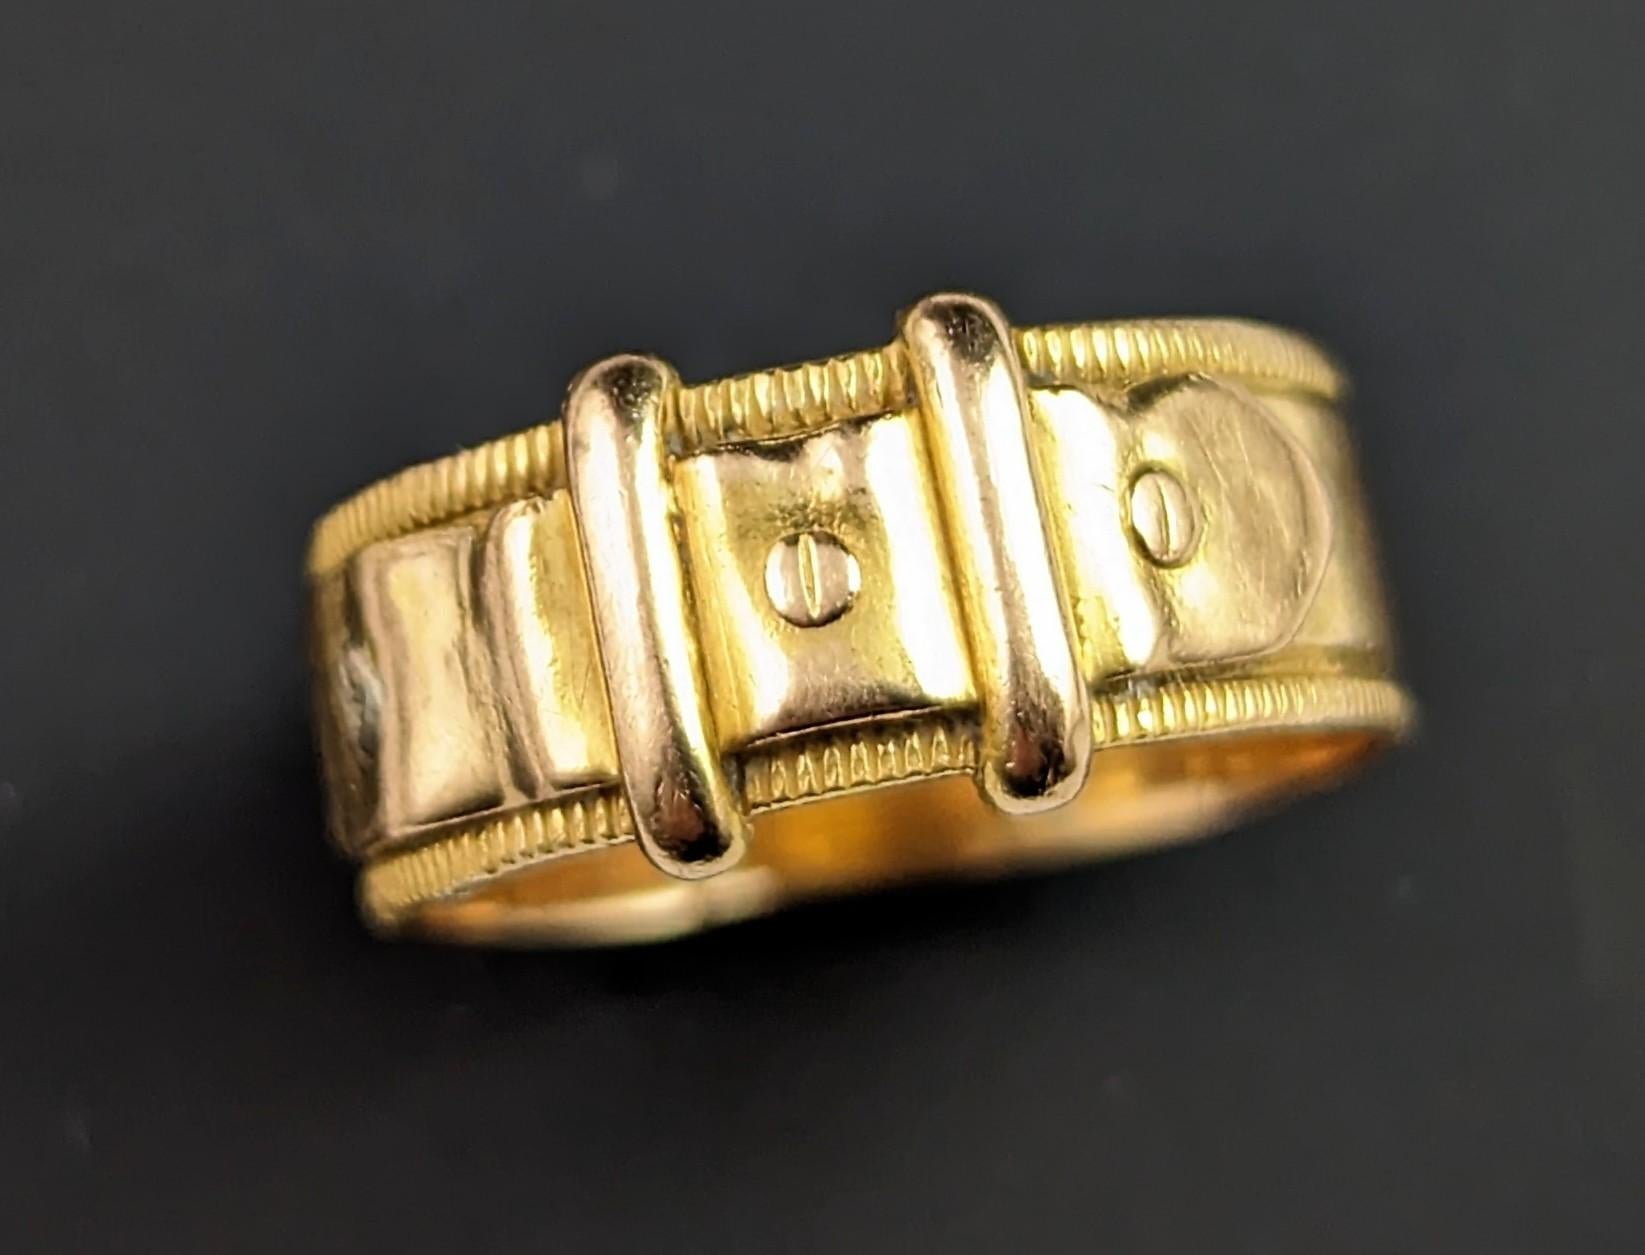 This antique 18kt gold Buckle ring is simply lush.

The rich gold band is lightly engraved and it has a buckle front design with tiny screw details, the buckle traditionally symbolises holding someone close or near and this really shows the